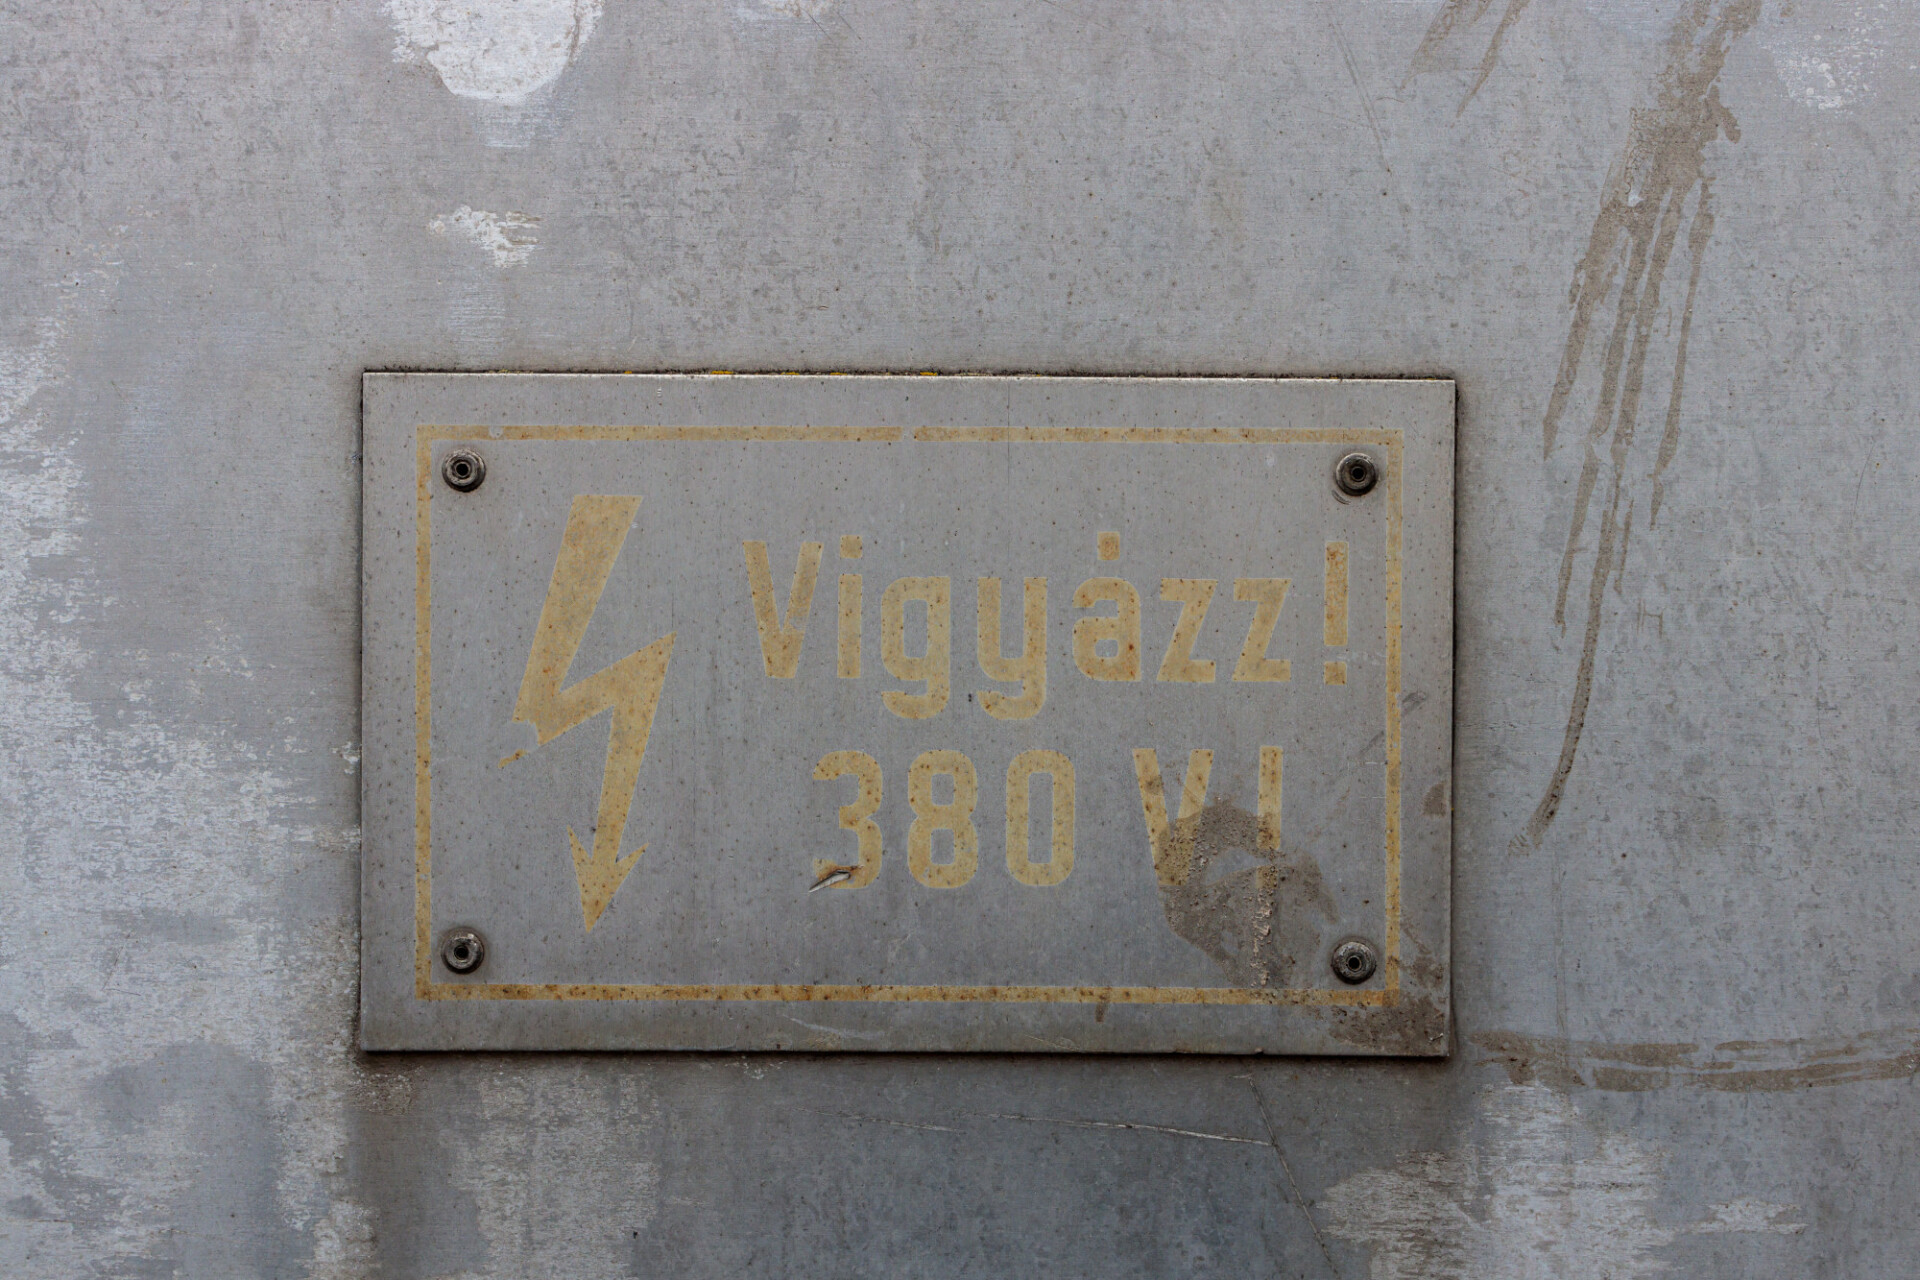 Power voltage box in Hungary